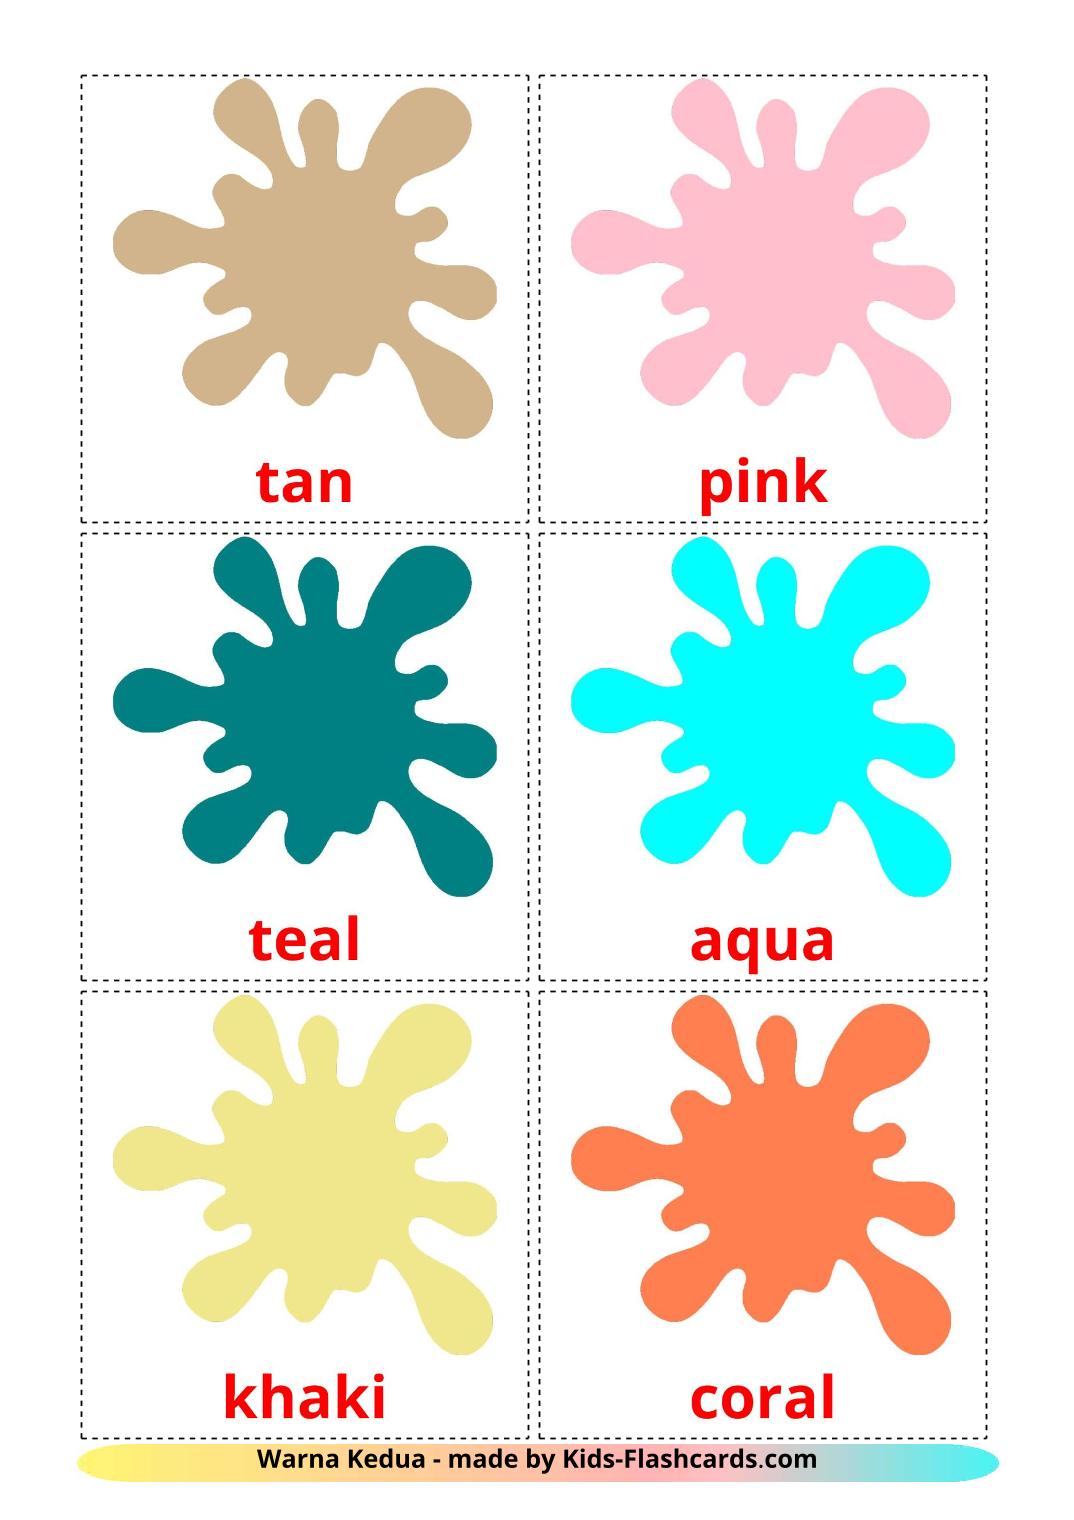 Secondary colors - 20 Free Printable malay Flashcards 